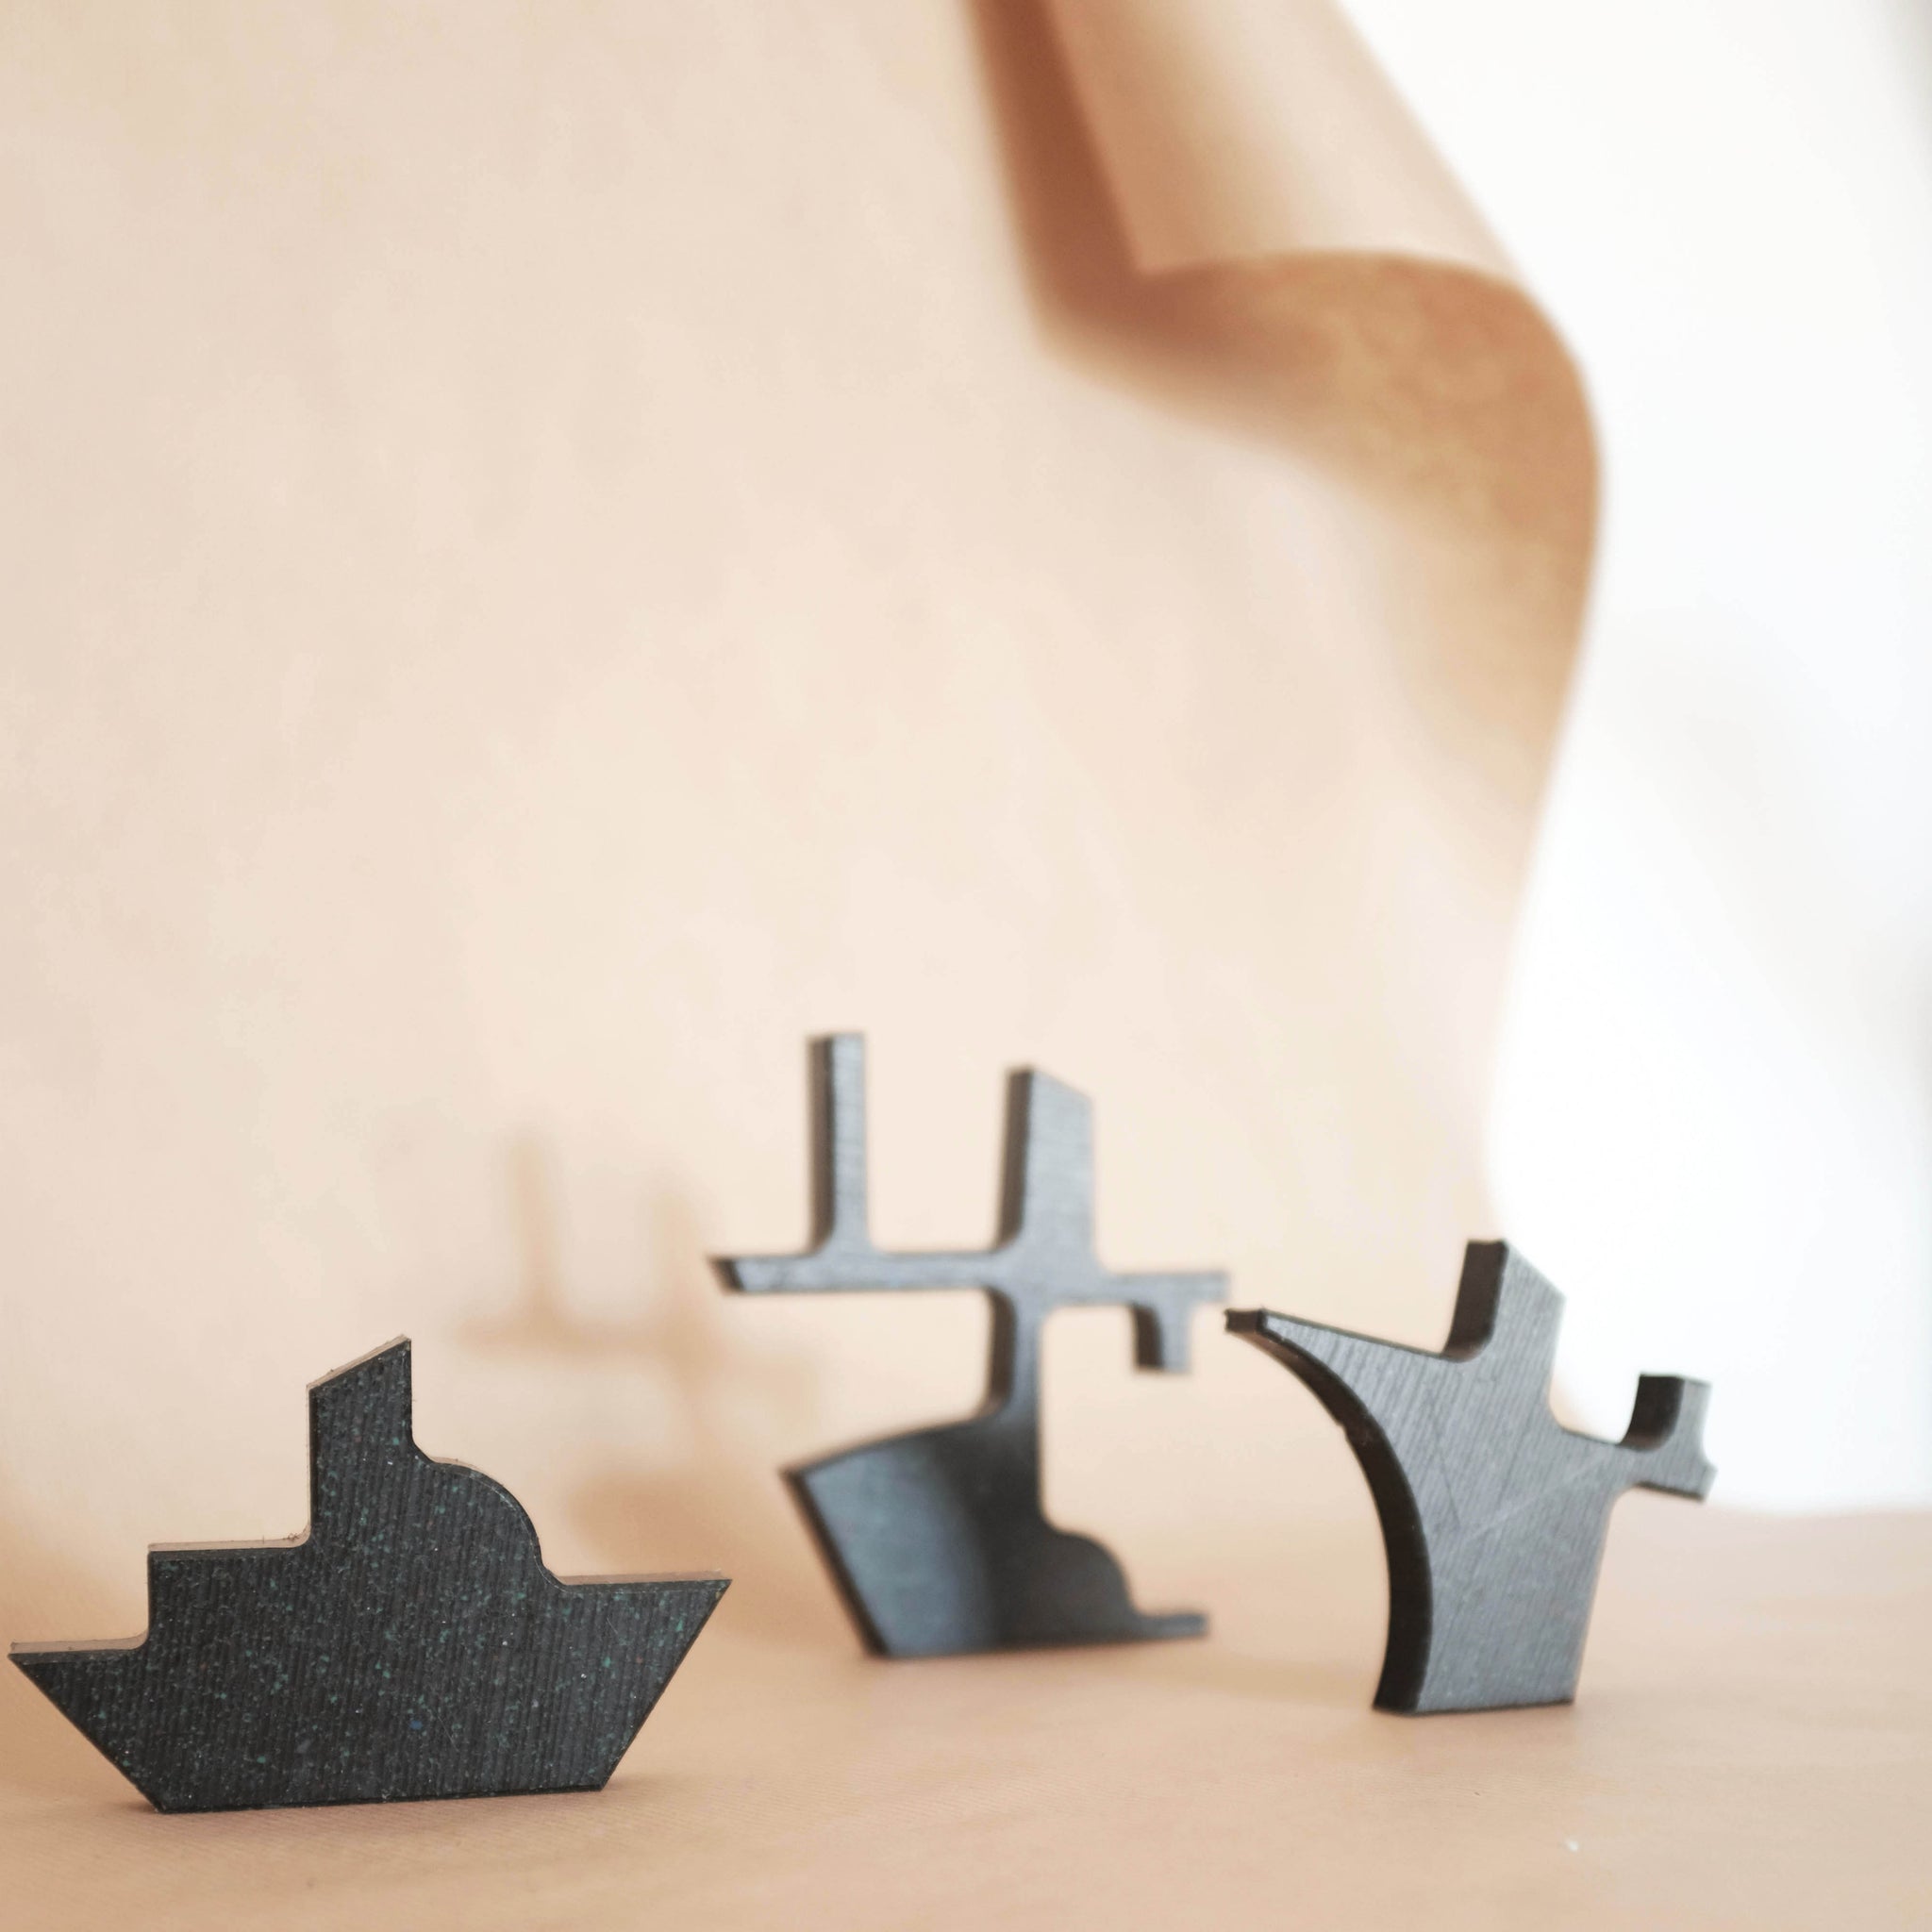 WALL HOOKS FROM RANDOM PRODUCTION CUT OFFS BY THE MINIMONO PROJECT - BRAND FOR ECO FRIENDLY - PLAYFUL - MULTI FUNCTIONAL - SUSTAINABLE - HIGH QUALITY - DESIGN FURNITURE FROM RECYCLED PLASTIC FOR BOTH ADULT AND CHILDREN MADE IN BERLIN GERMANY